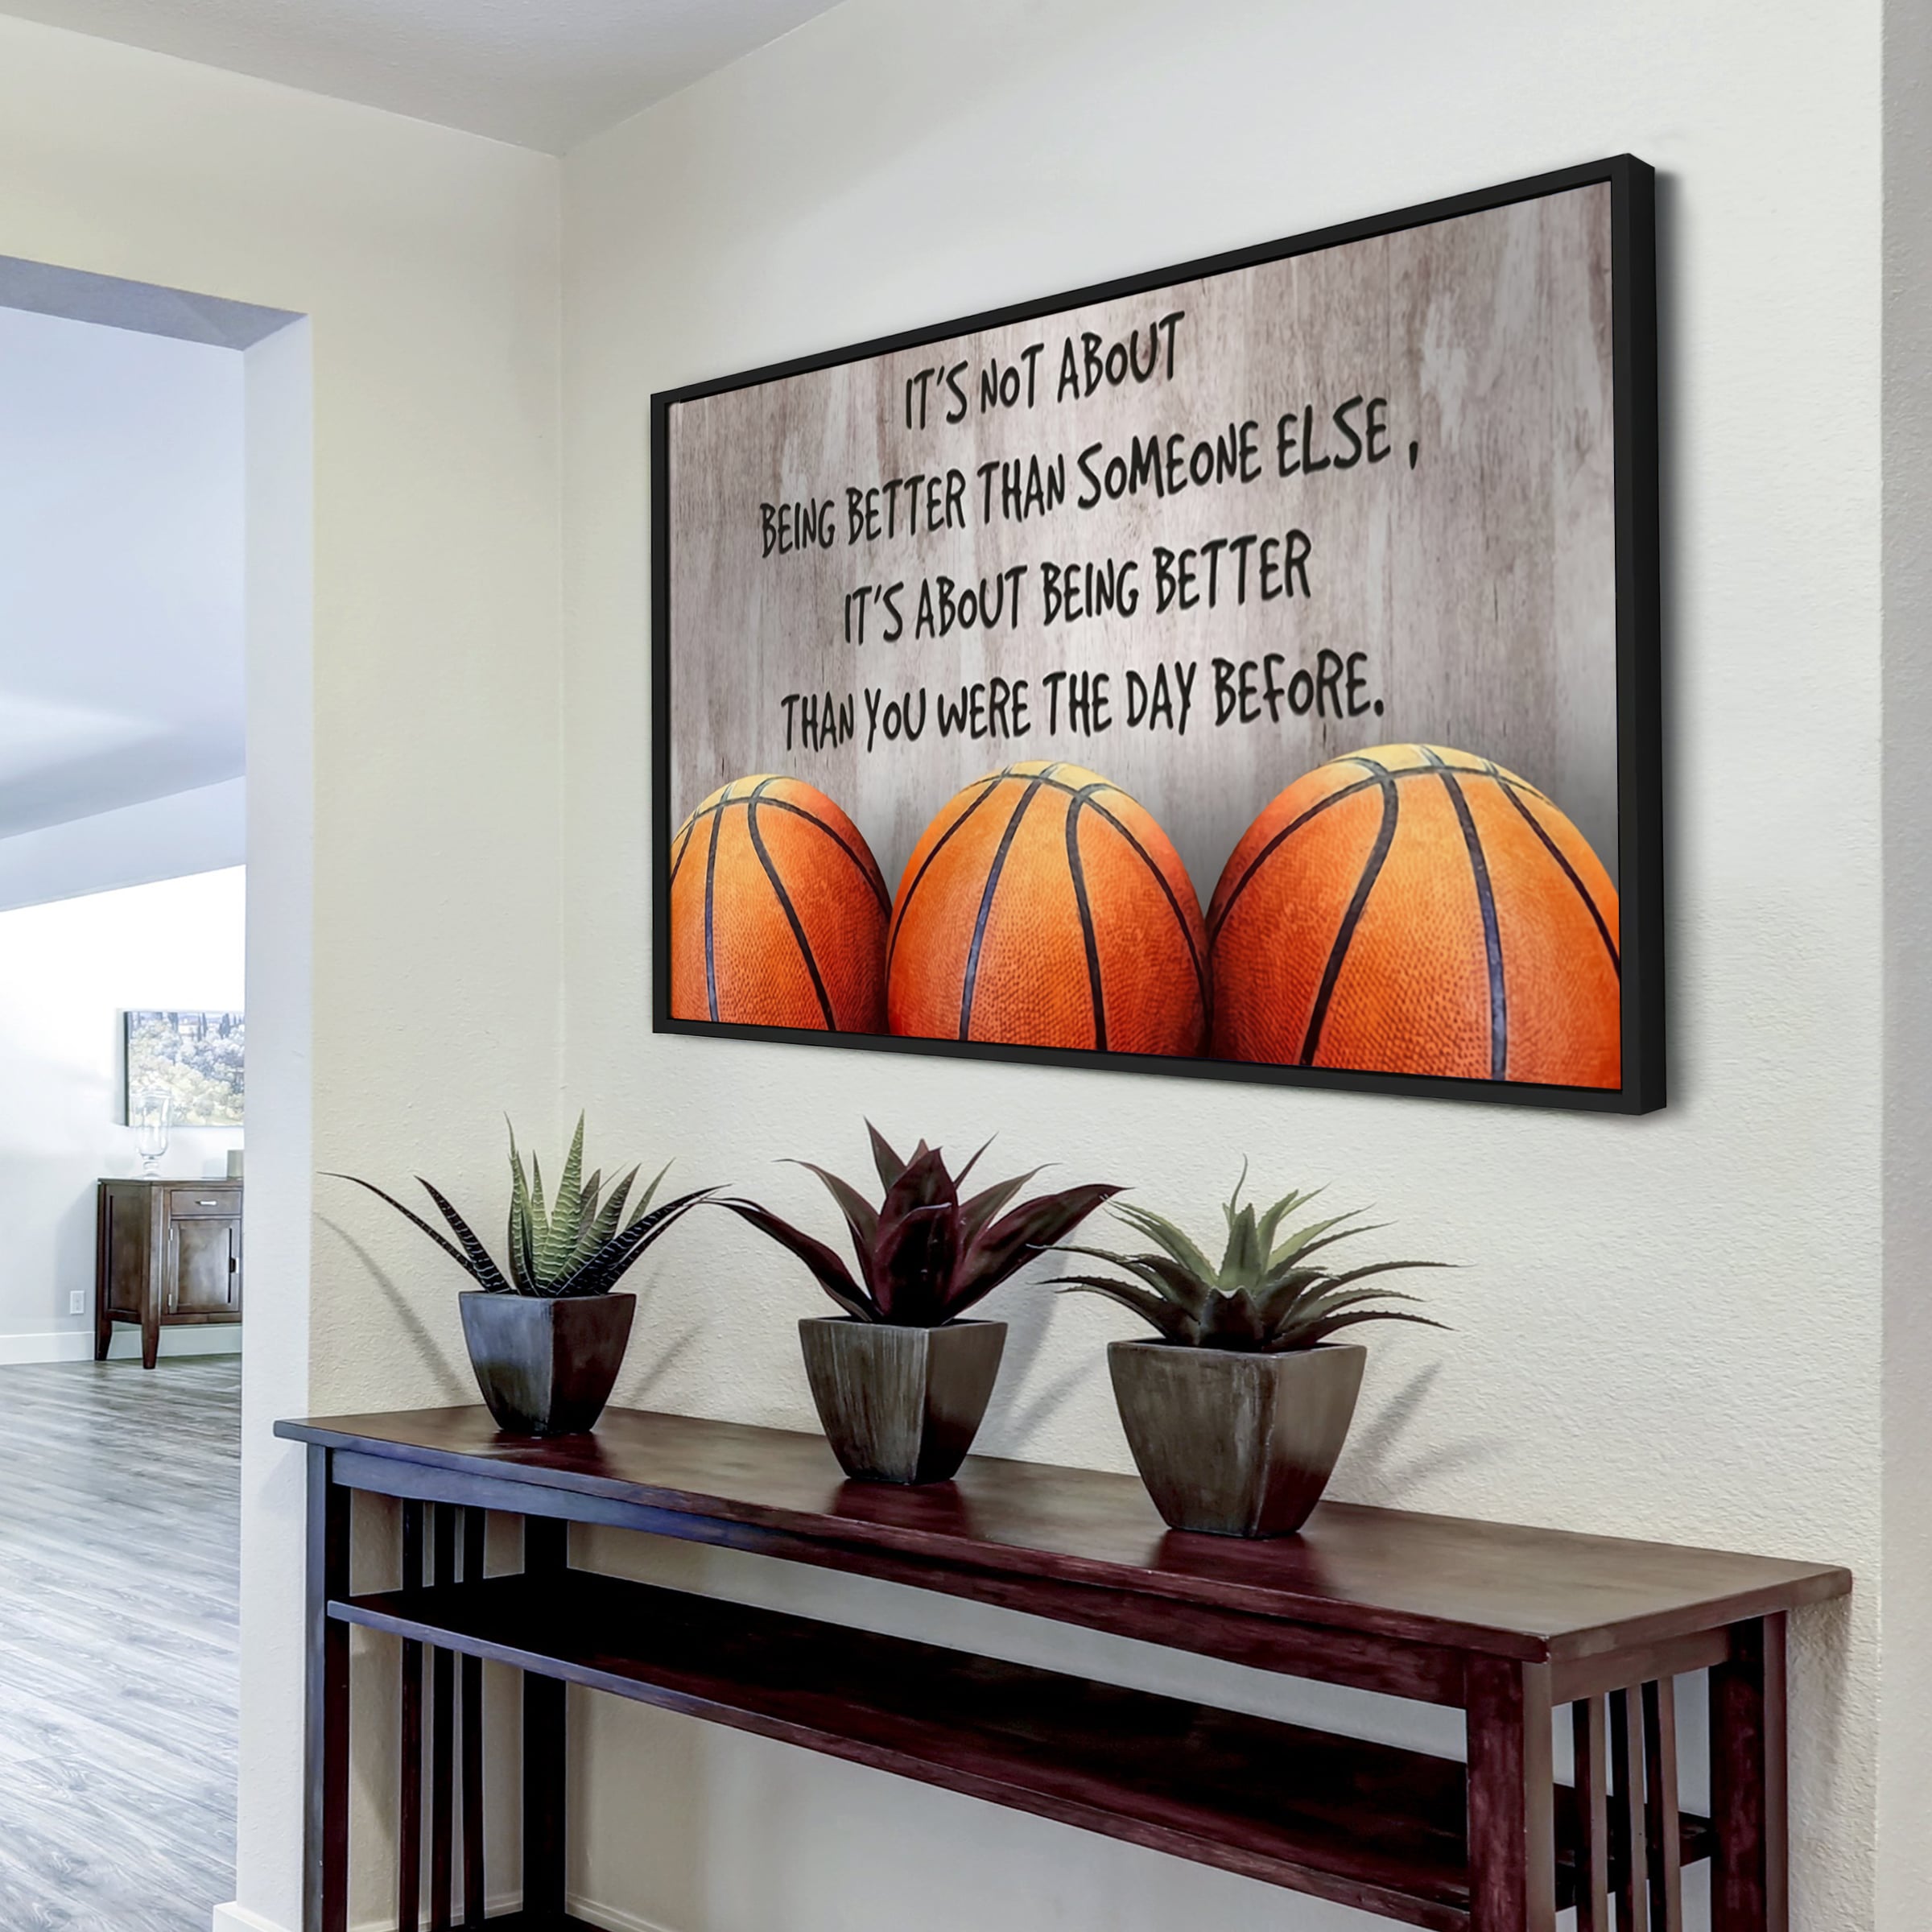 Basketball Ver 5 Customizable Poster Canvas It is not about better than someone else, It is about being better than you were the day before